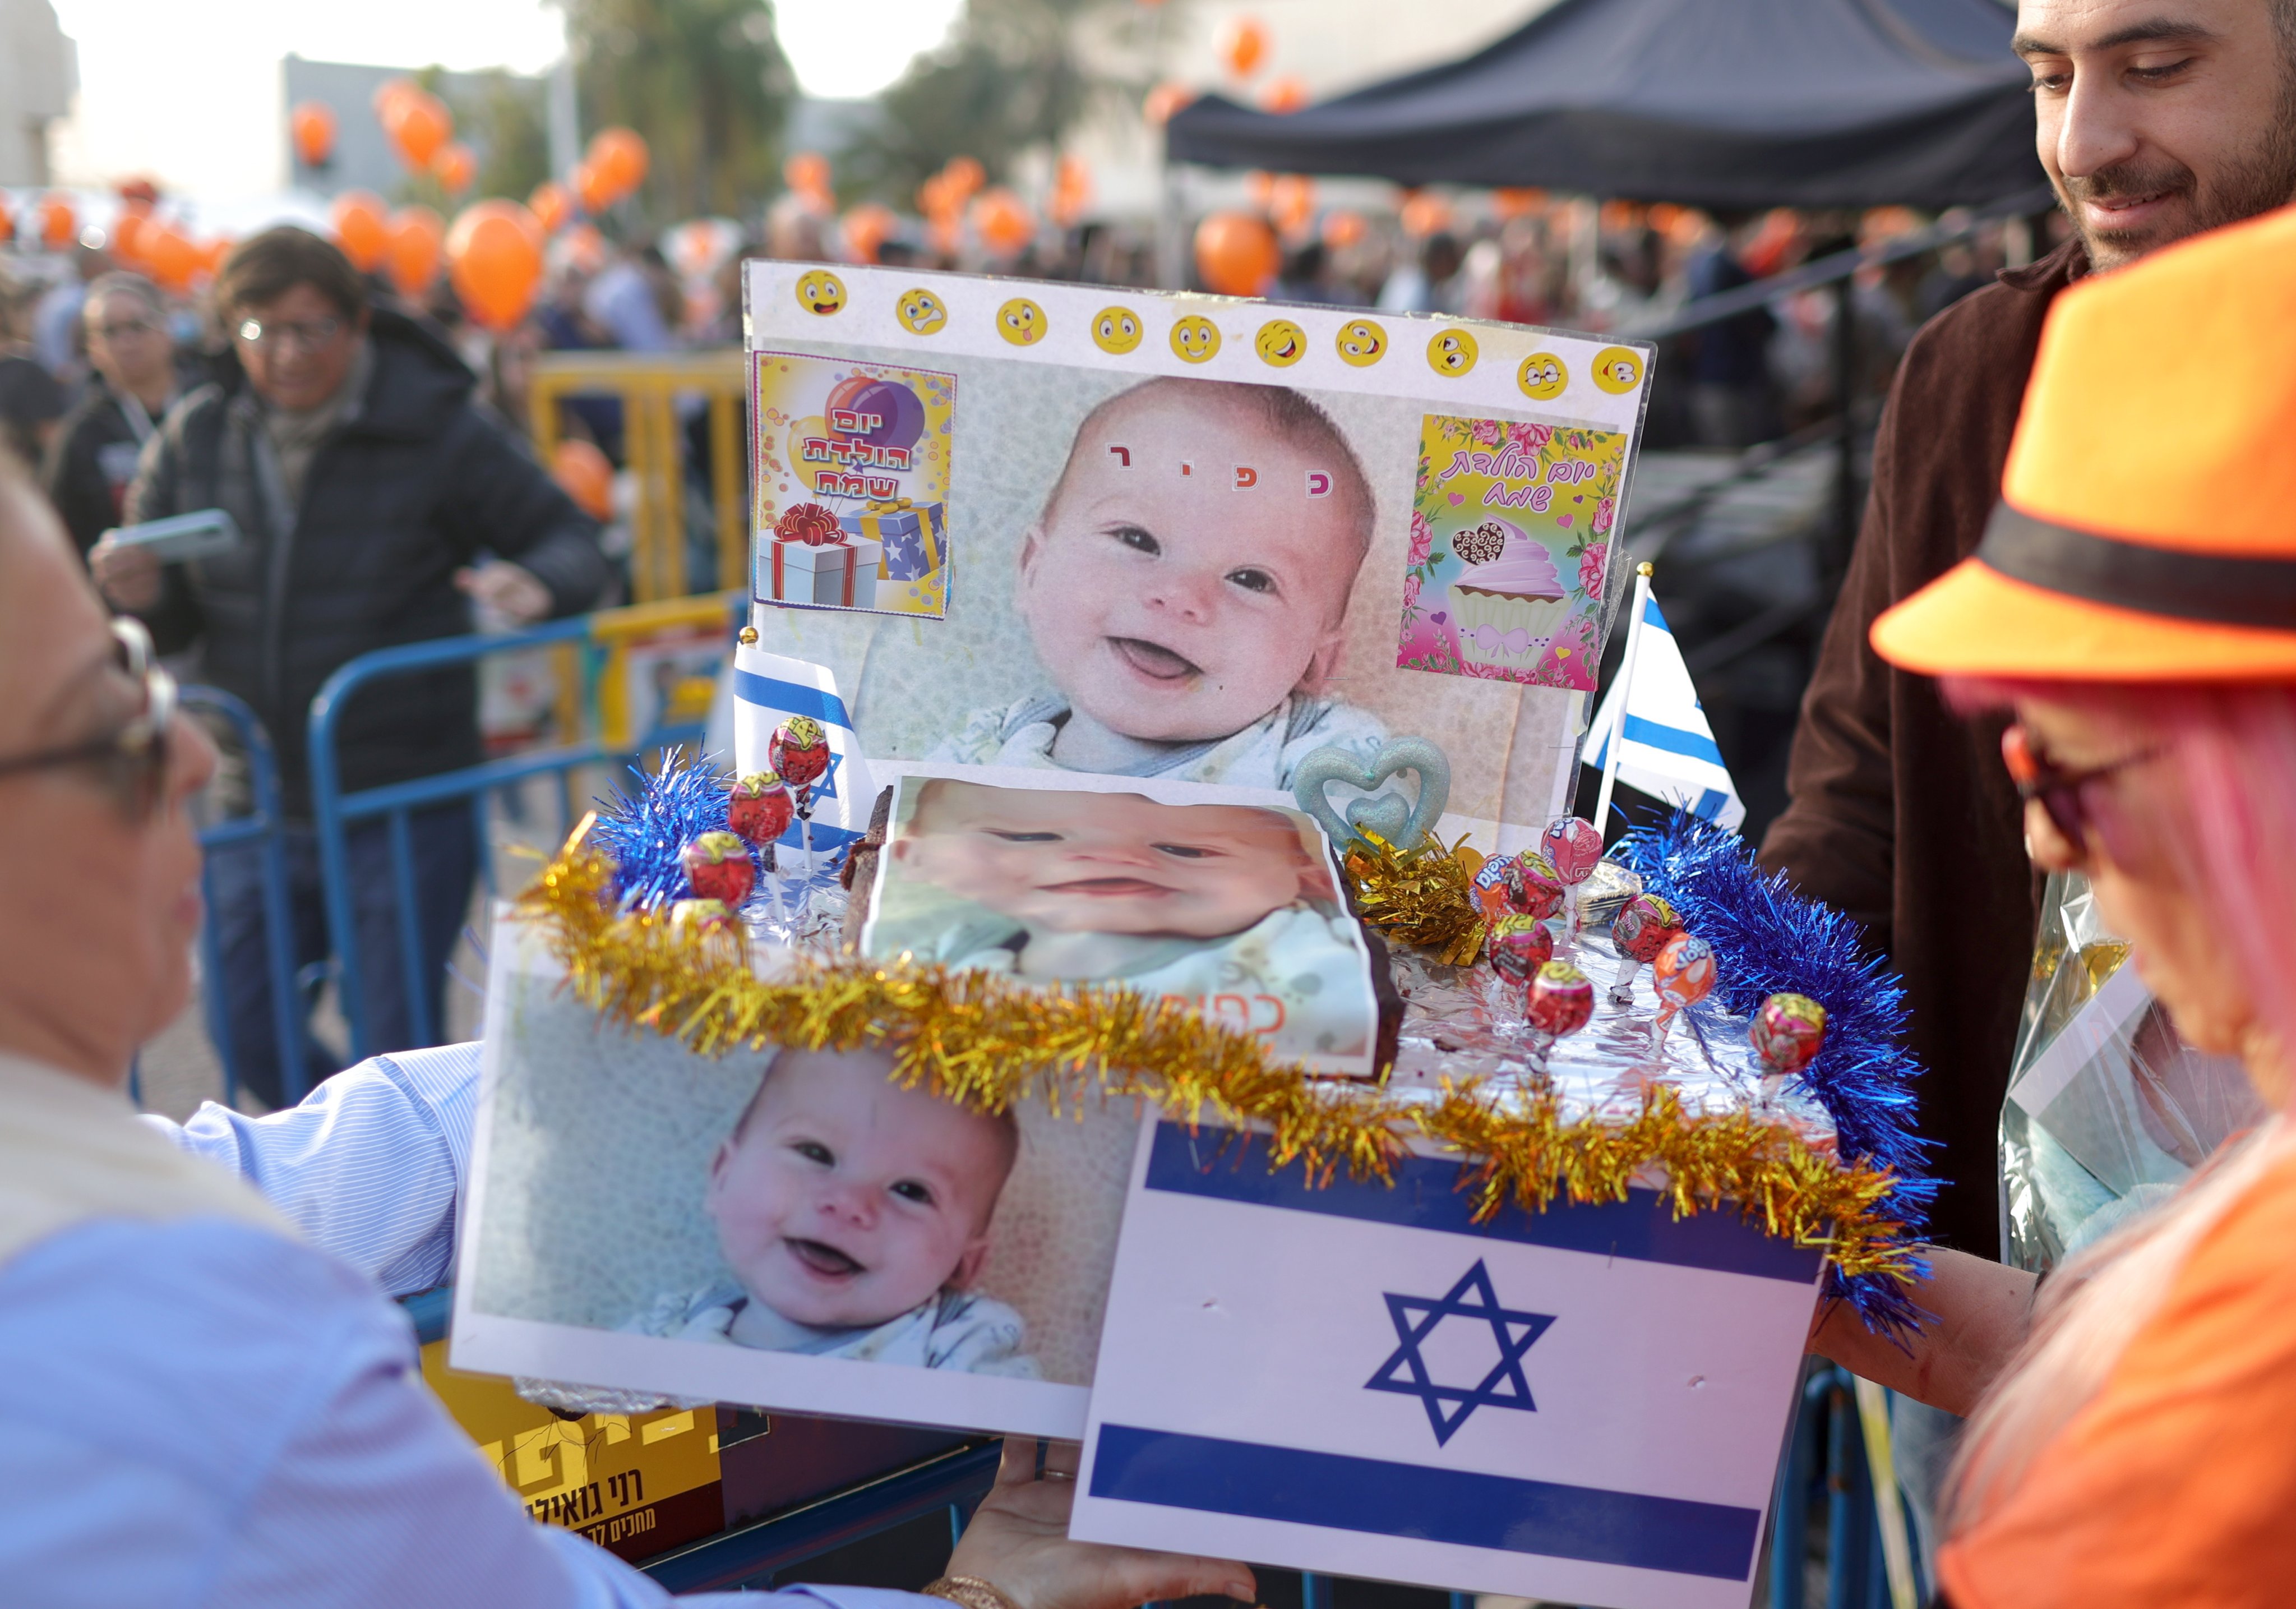 People hold a birthday cake to mark the first birthday of Israeli toddler Kfir Bibas, who is held hostage by Hamas in Gaza, outside the Kirya military base in Tel Aviv, Israel on Thursday. Photo: EPA-EFE